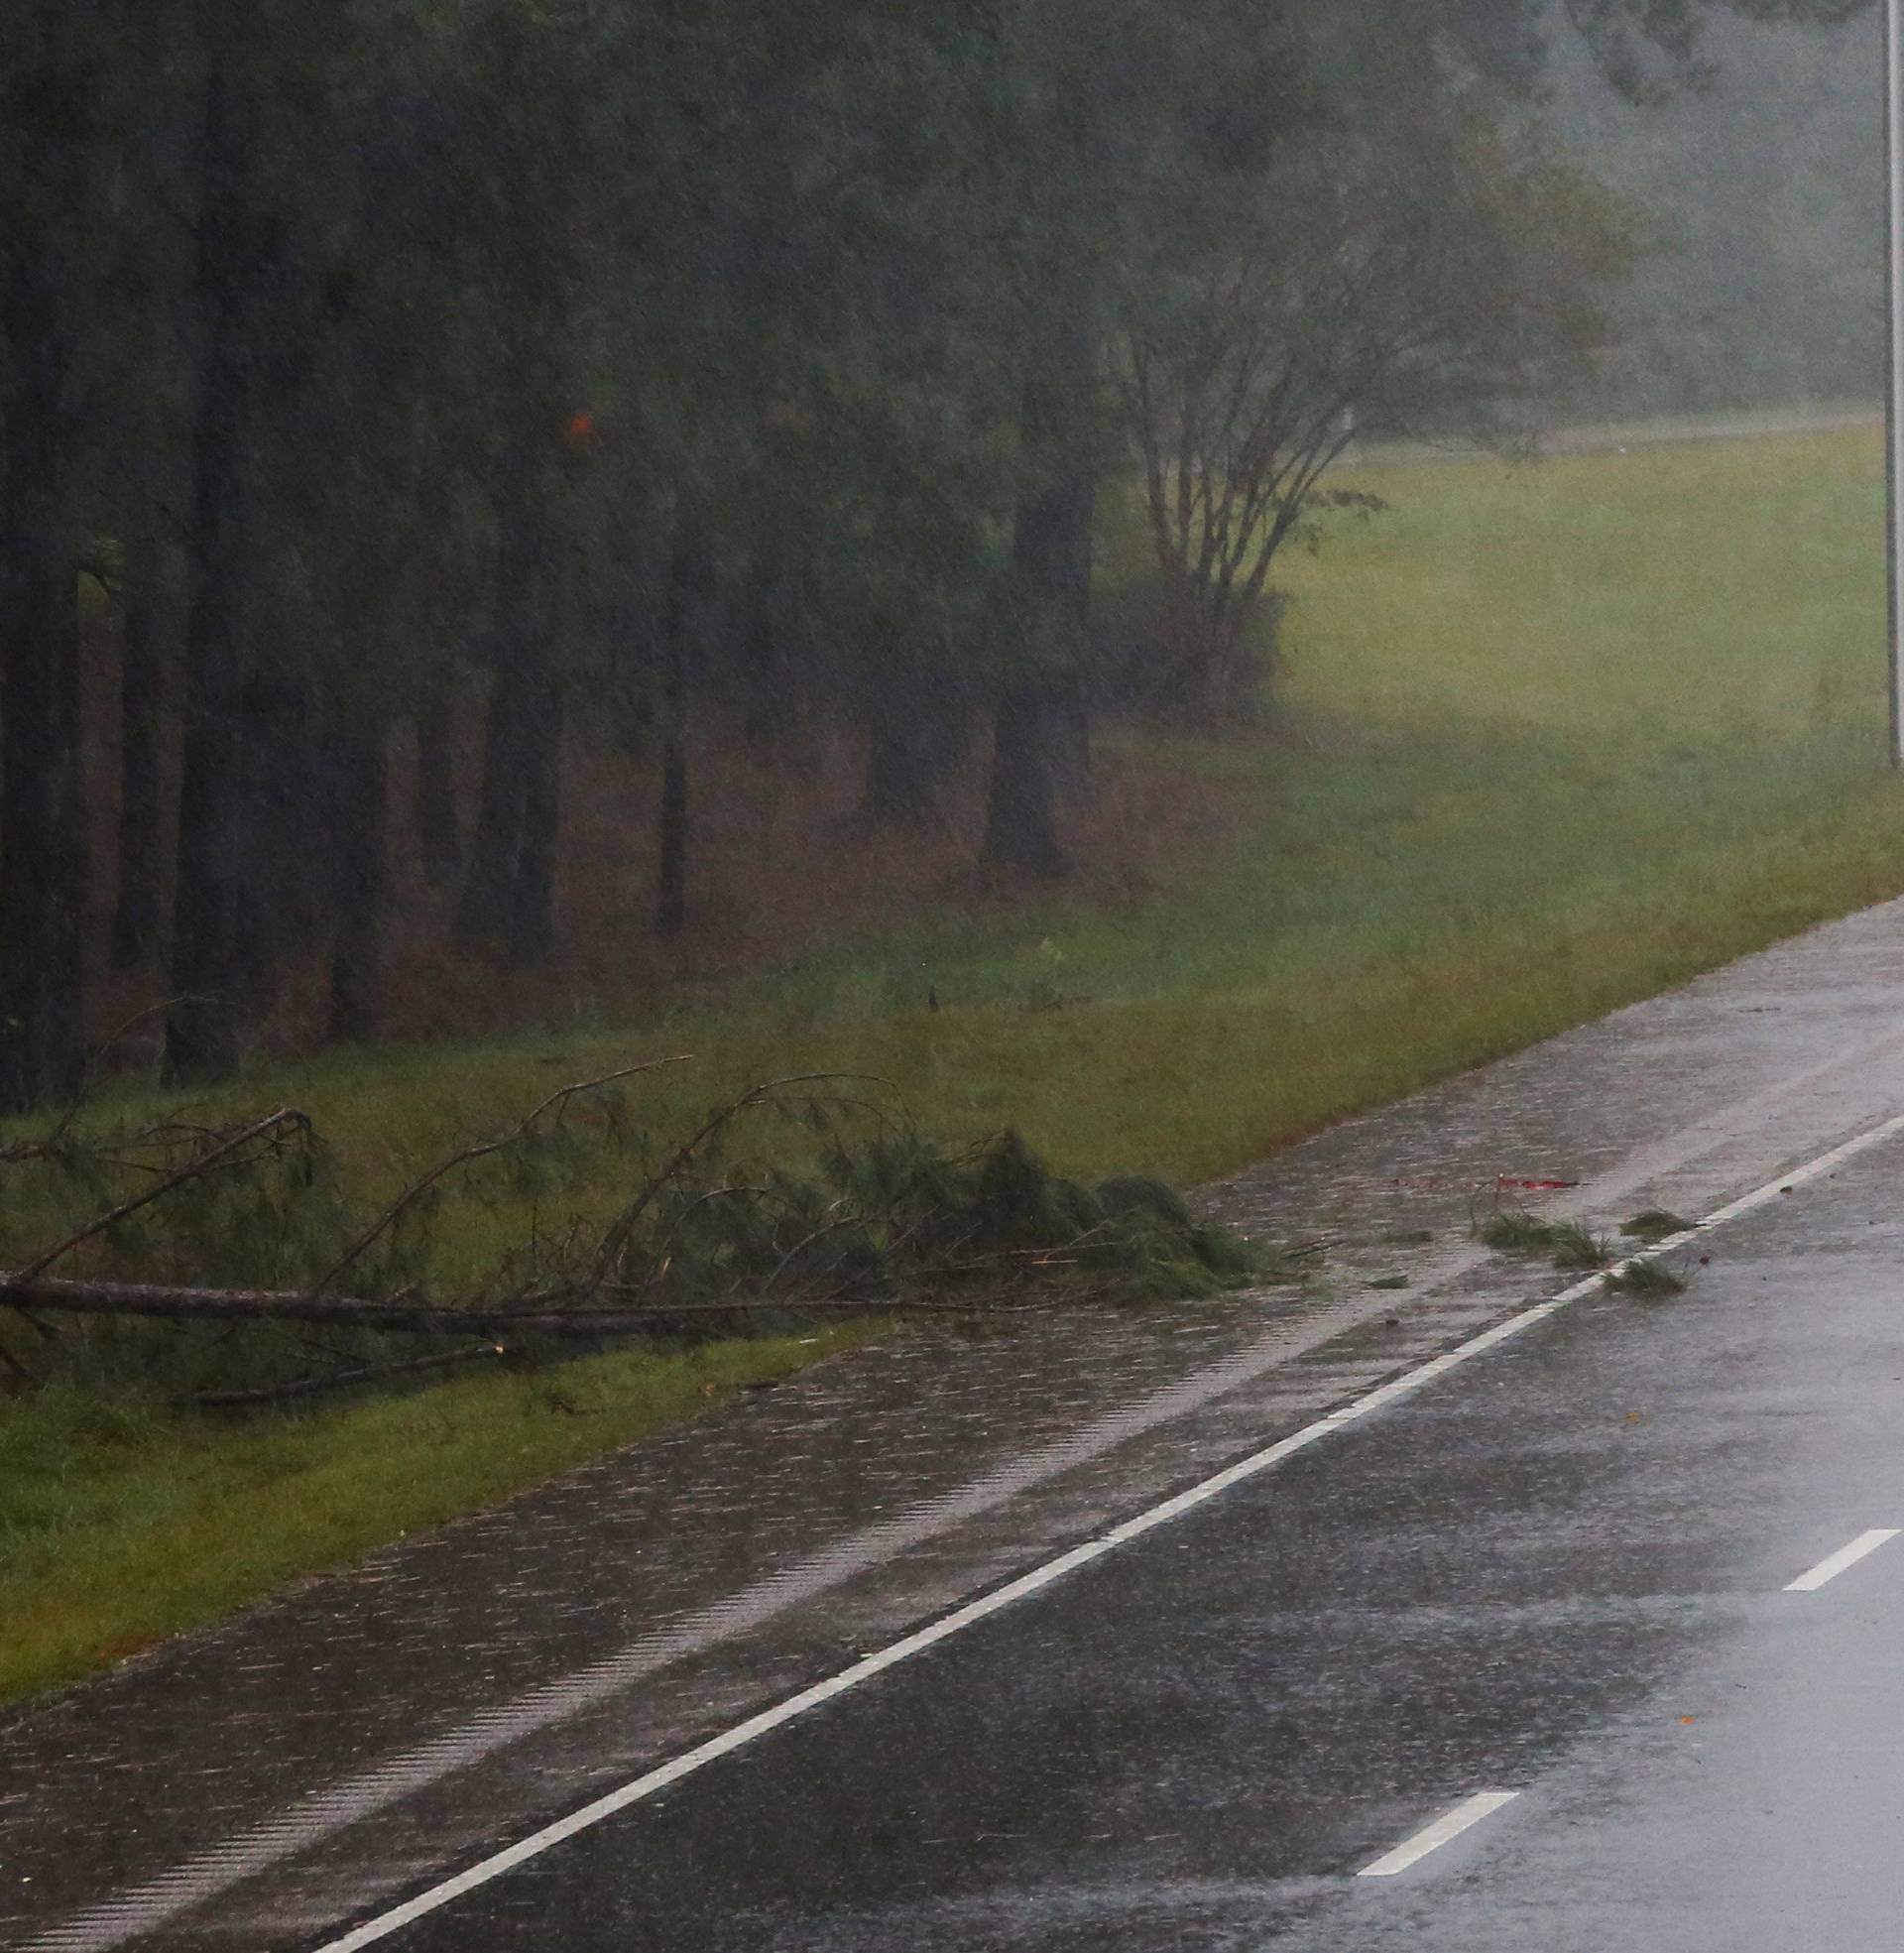 A truck drives along a I 95 Road as winds from Hurricane Florence hit the town of Wilson, North Carolina